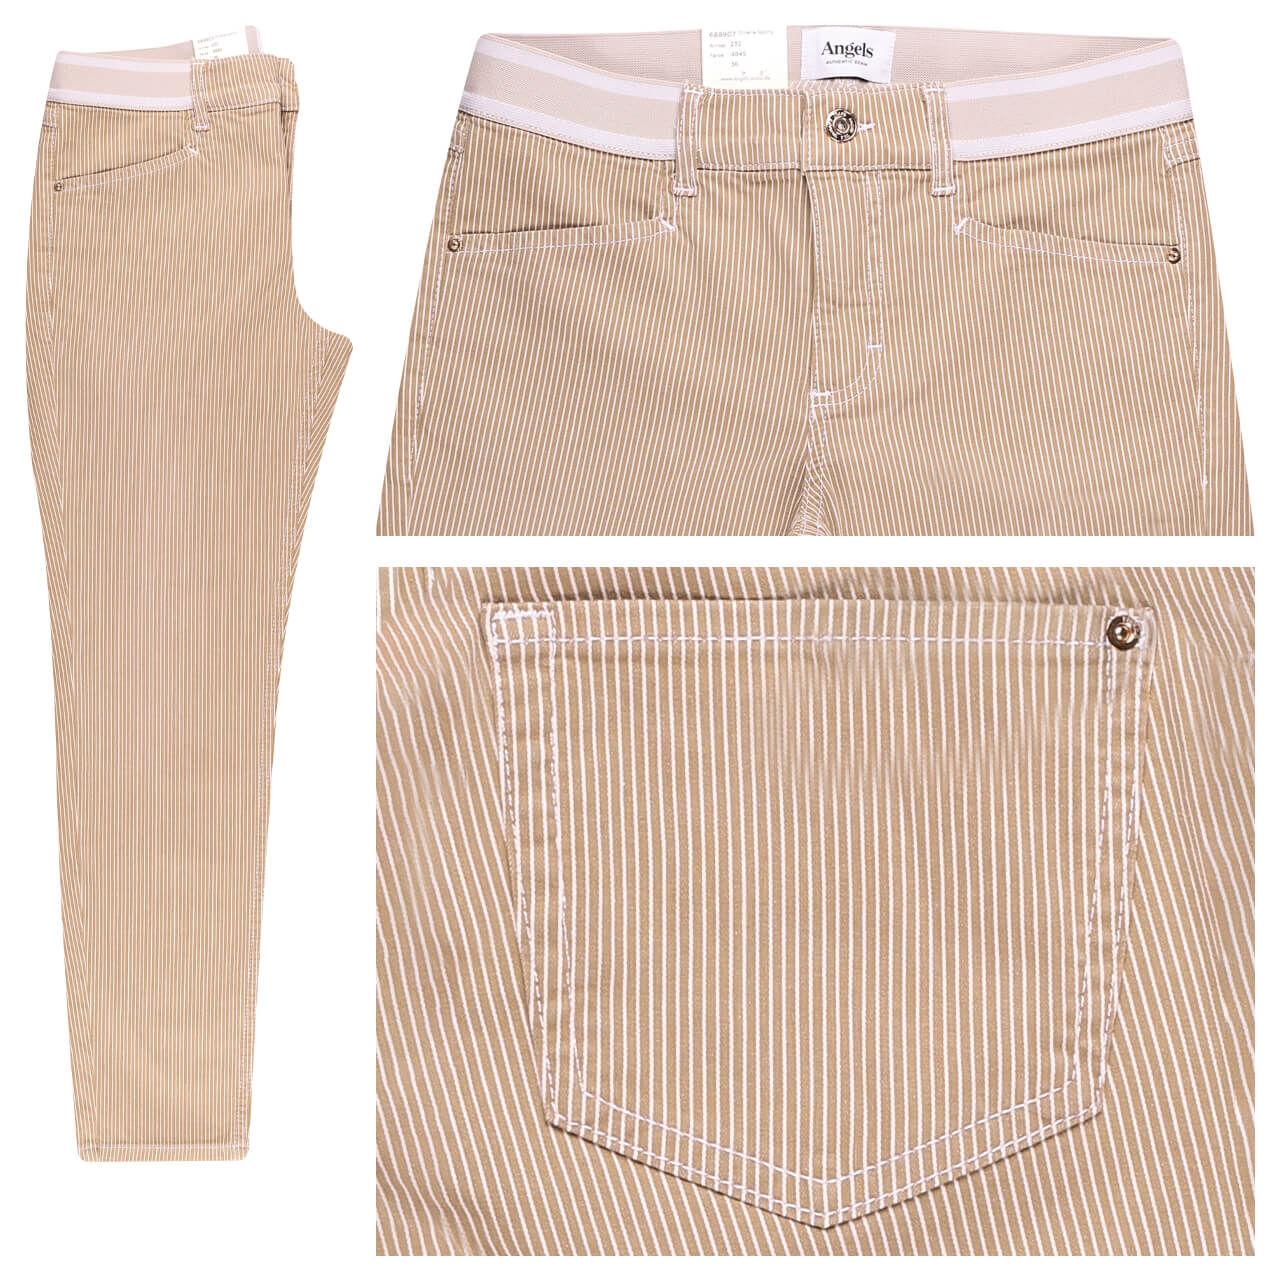 Angels Ornella Sporty 7/8 Jeans sand used striped